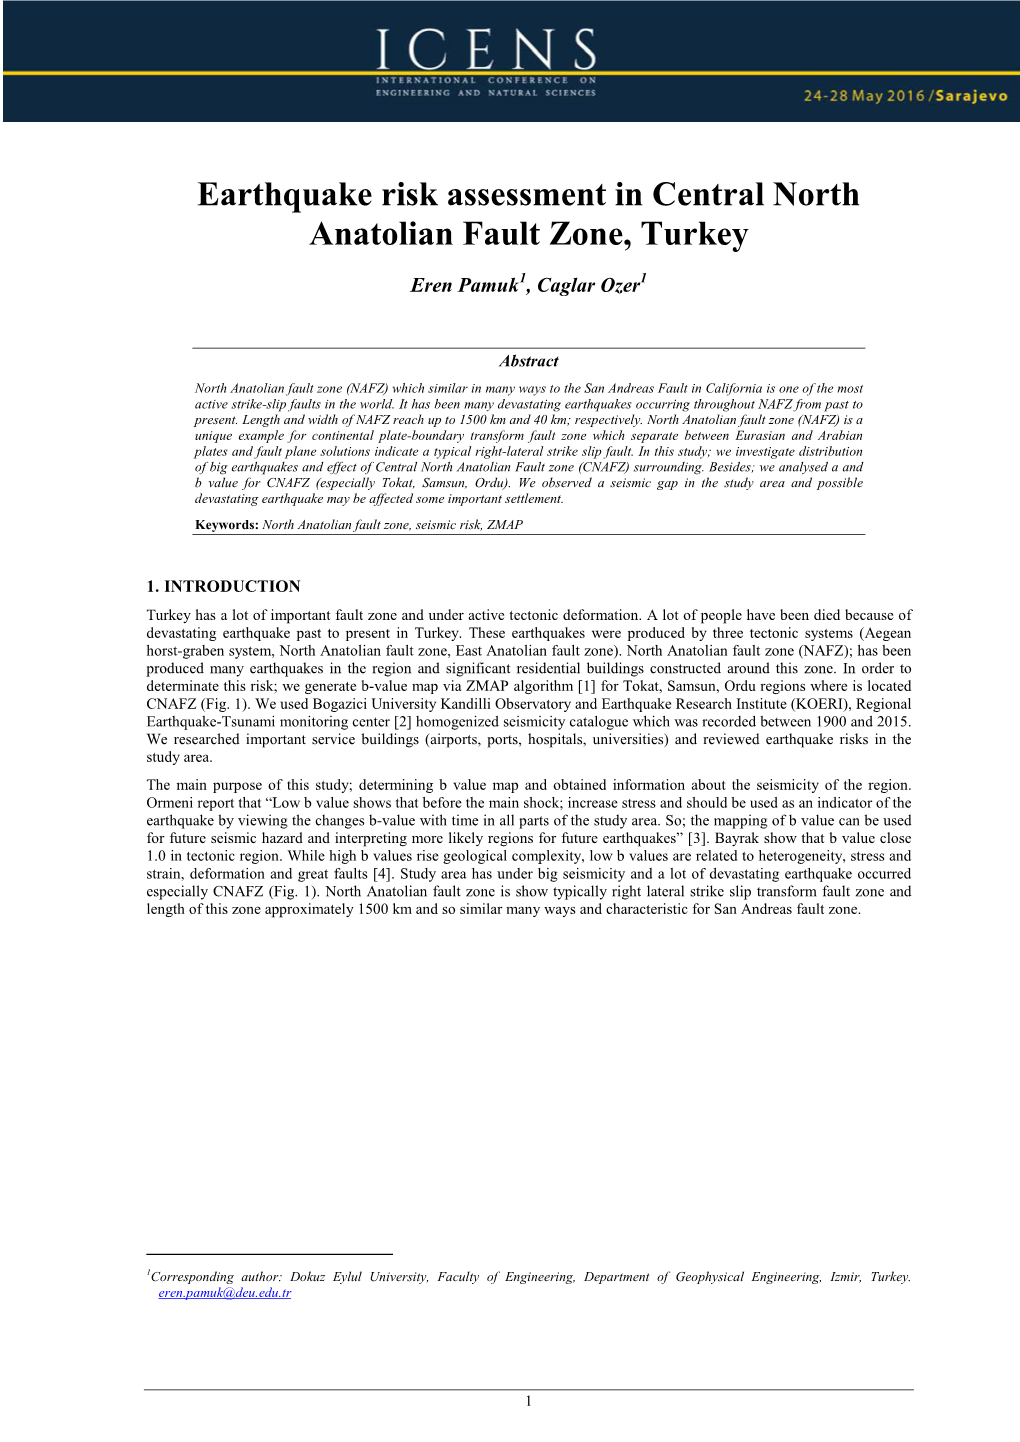 Earthquake Risk Assessment in Central North Anatolian Fault Zone, Turkey